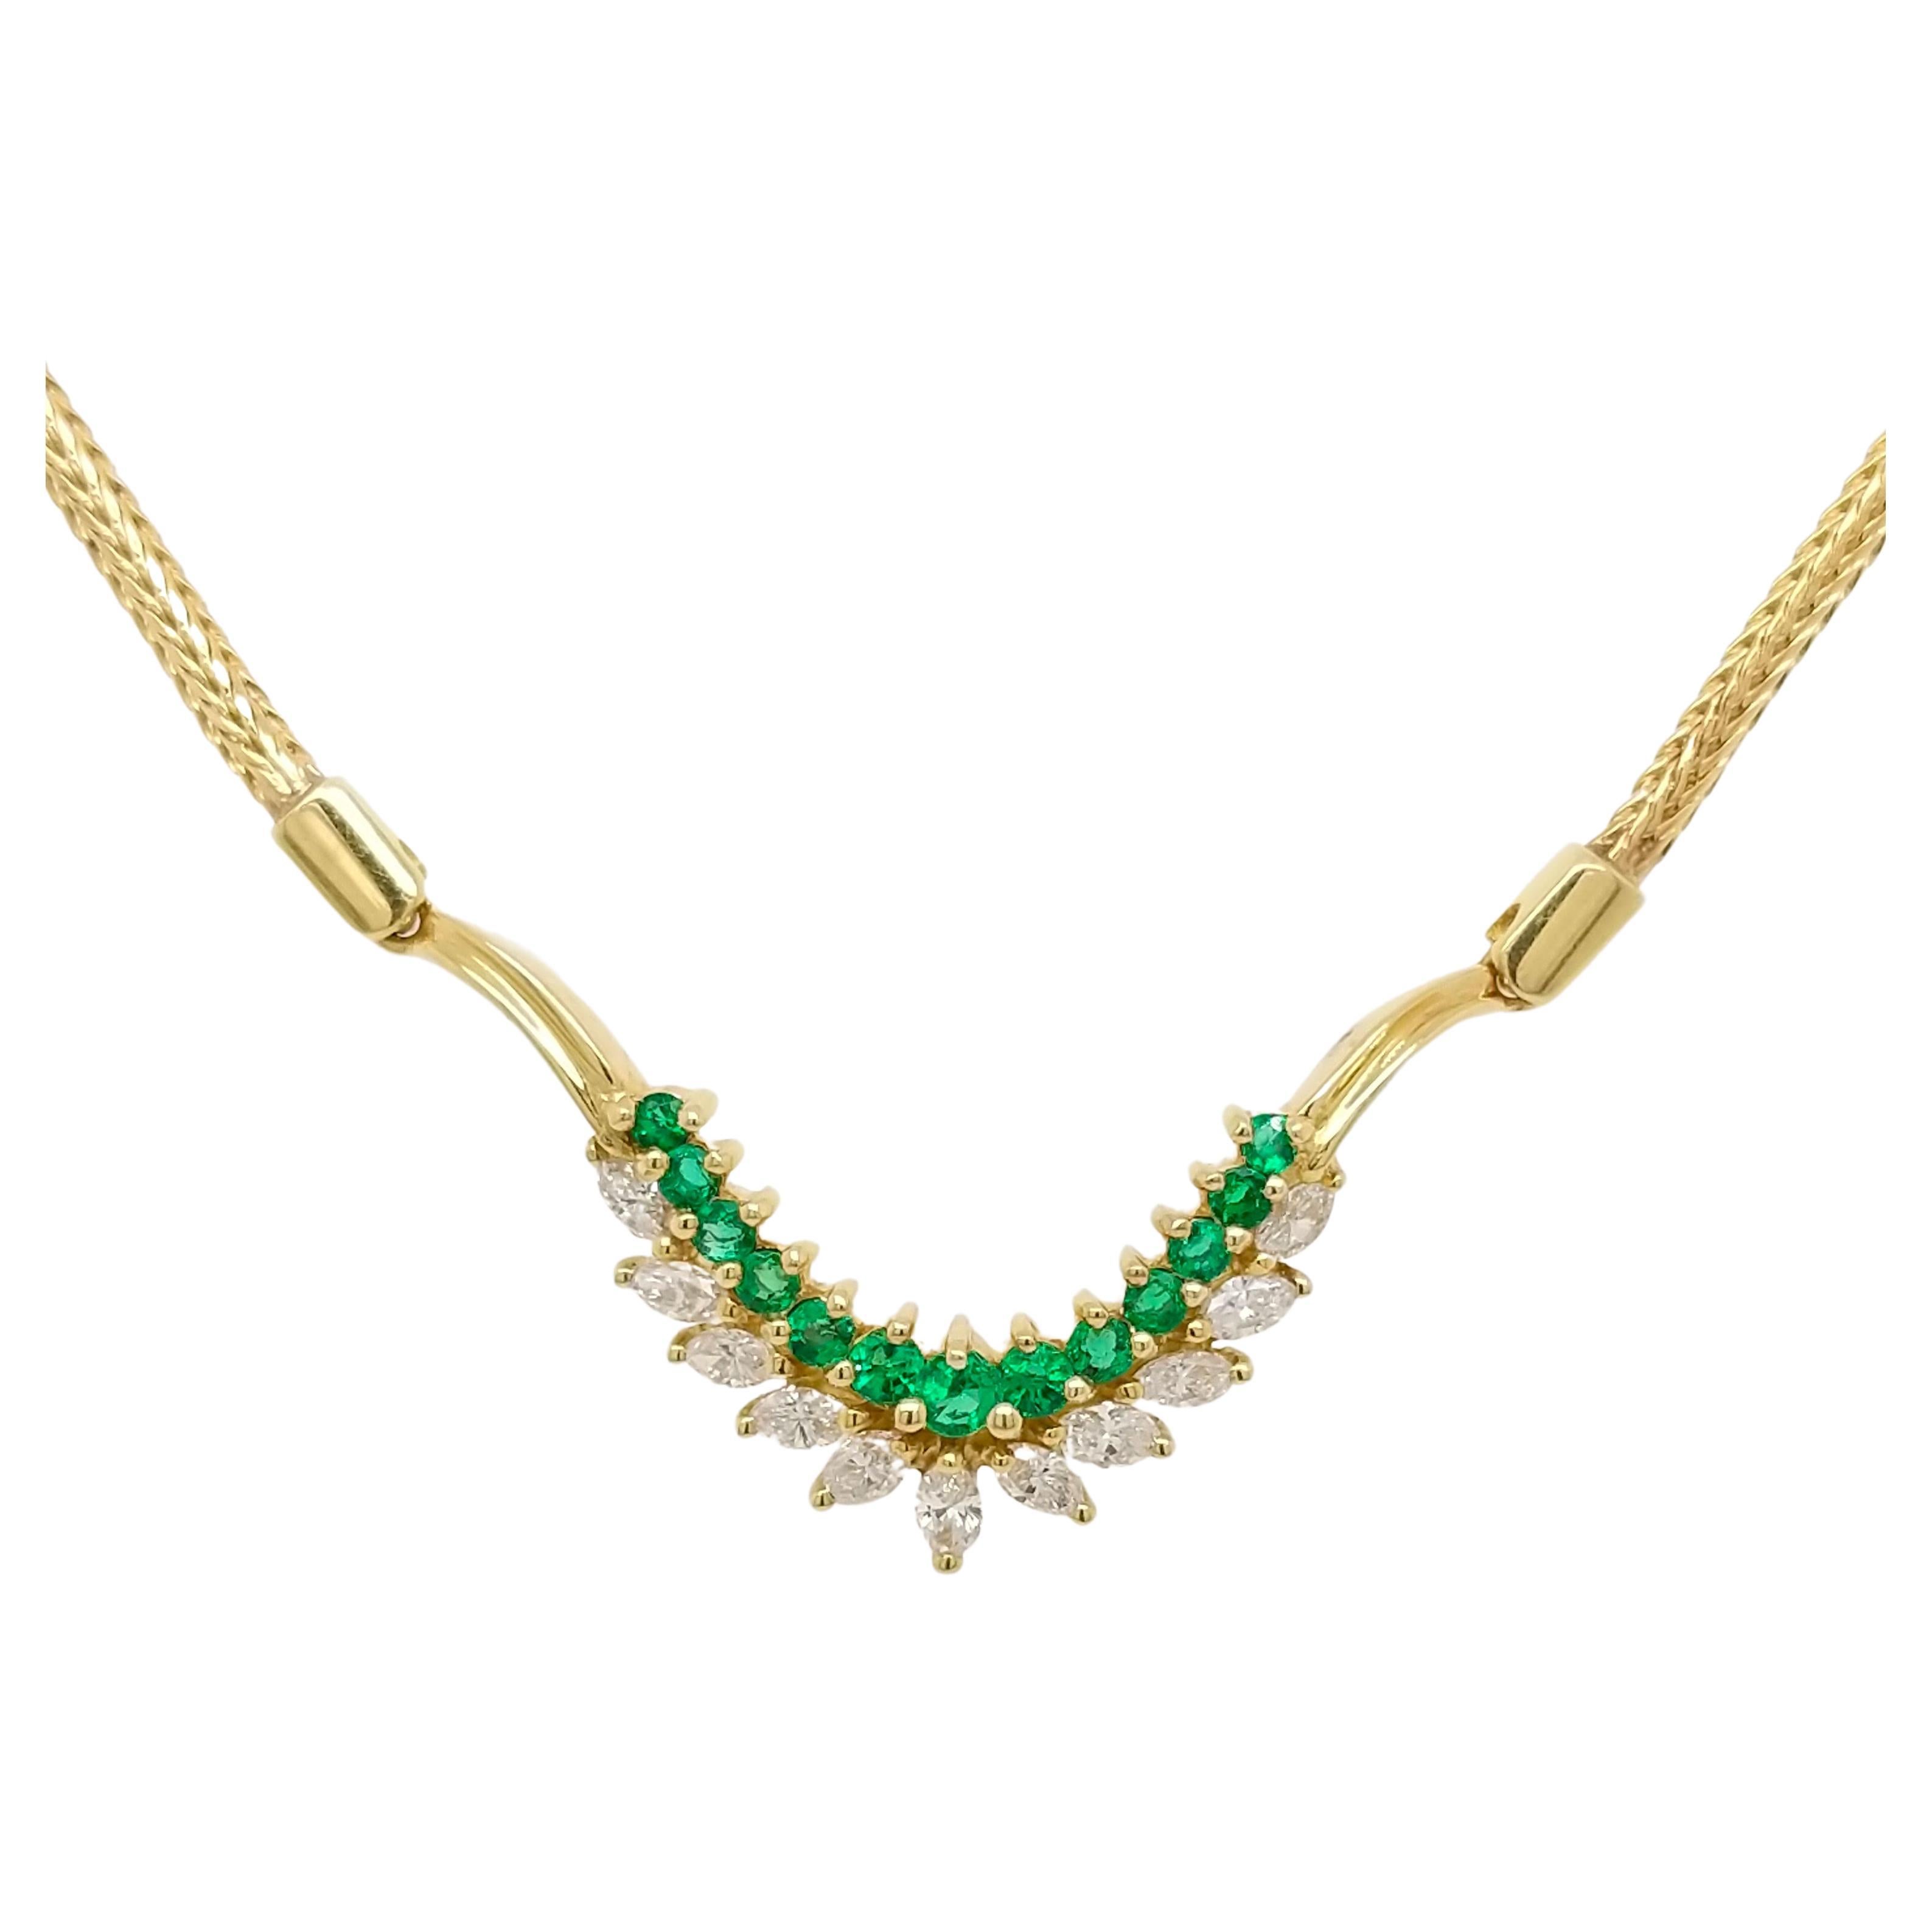 1960s Black, Starr & Frost 18K Yellow Gold Diamond and Emerald Necklace For Sale